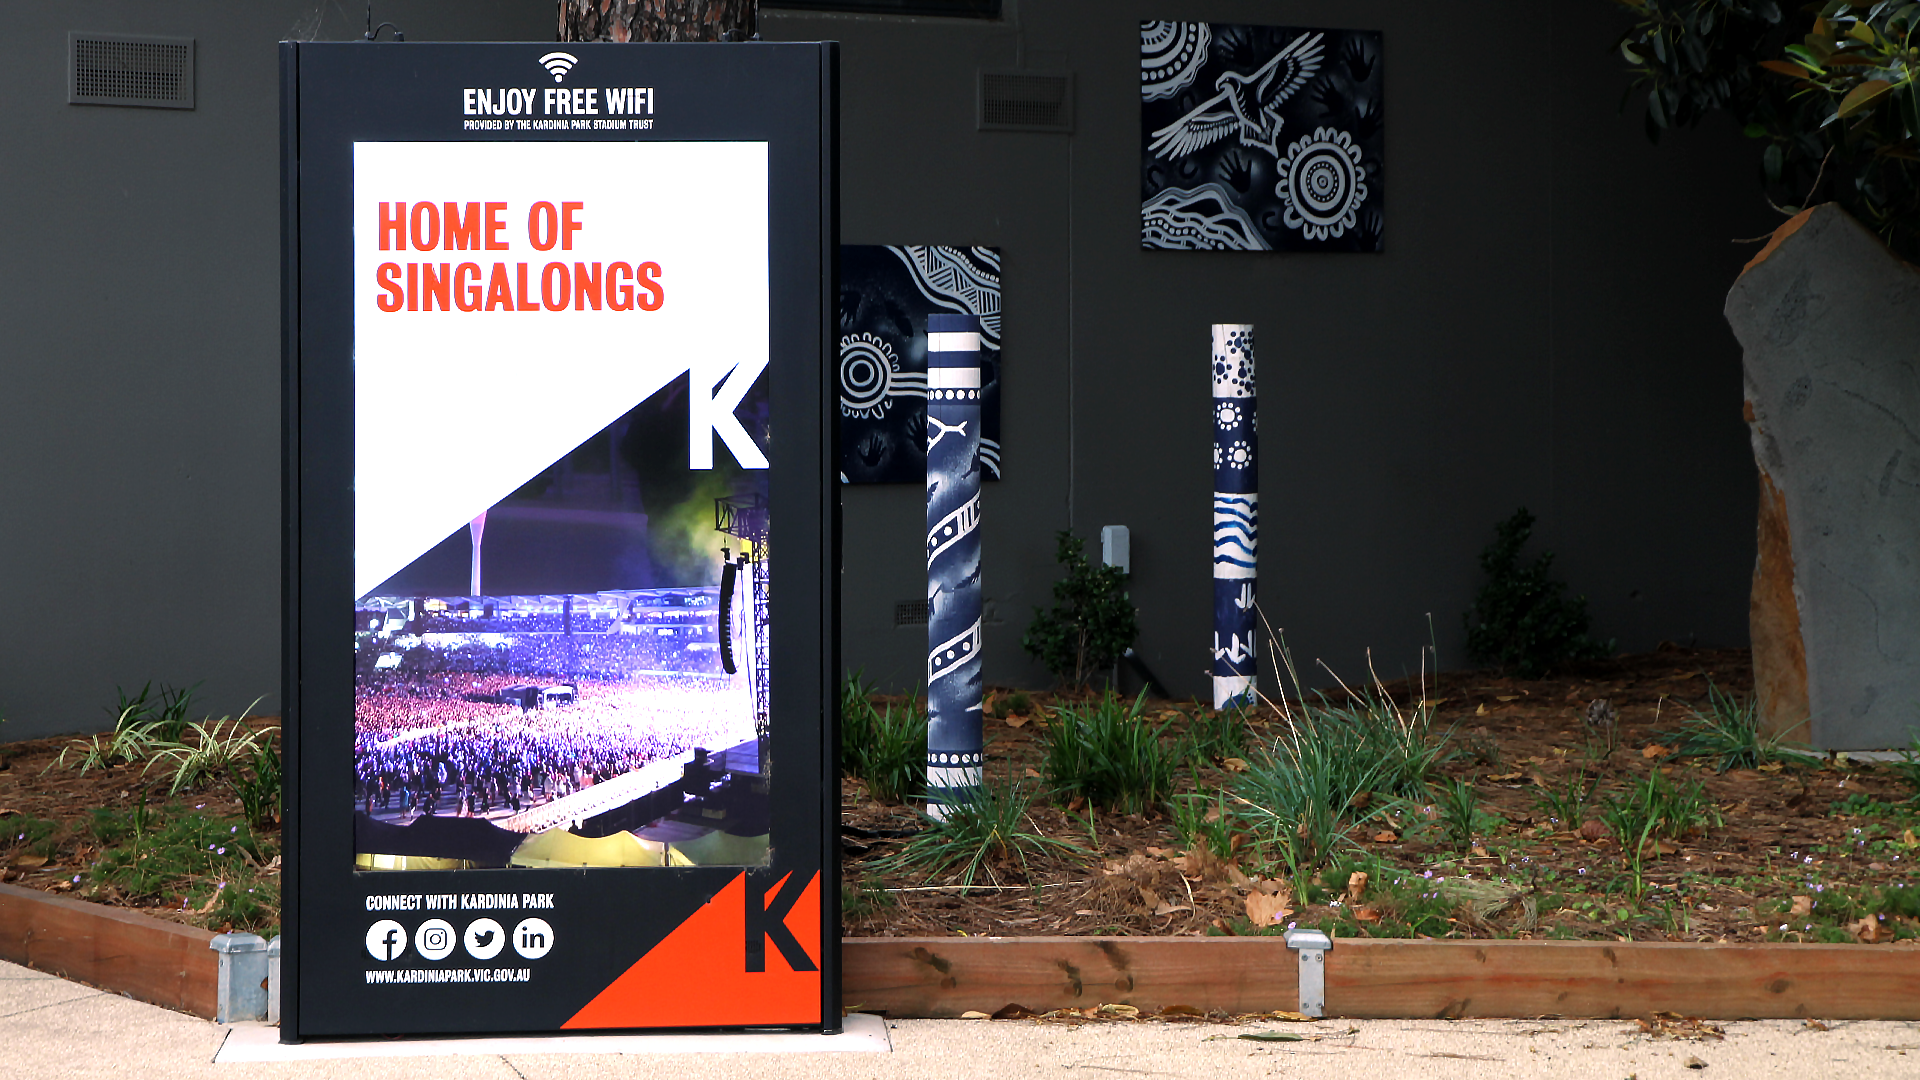 Kardinia Park outdoor sign promoting the stadium as the 'Home of singalongs'